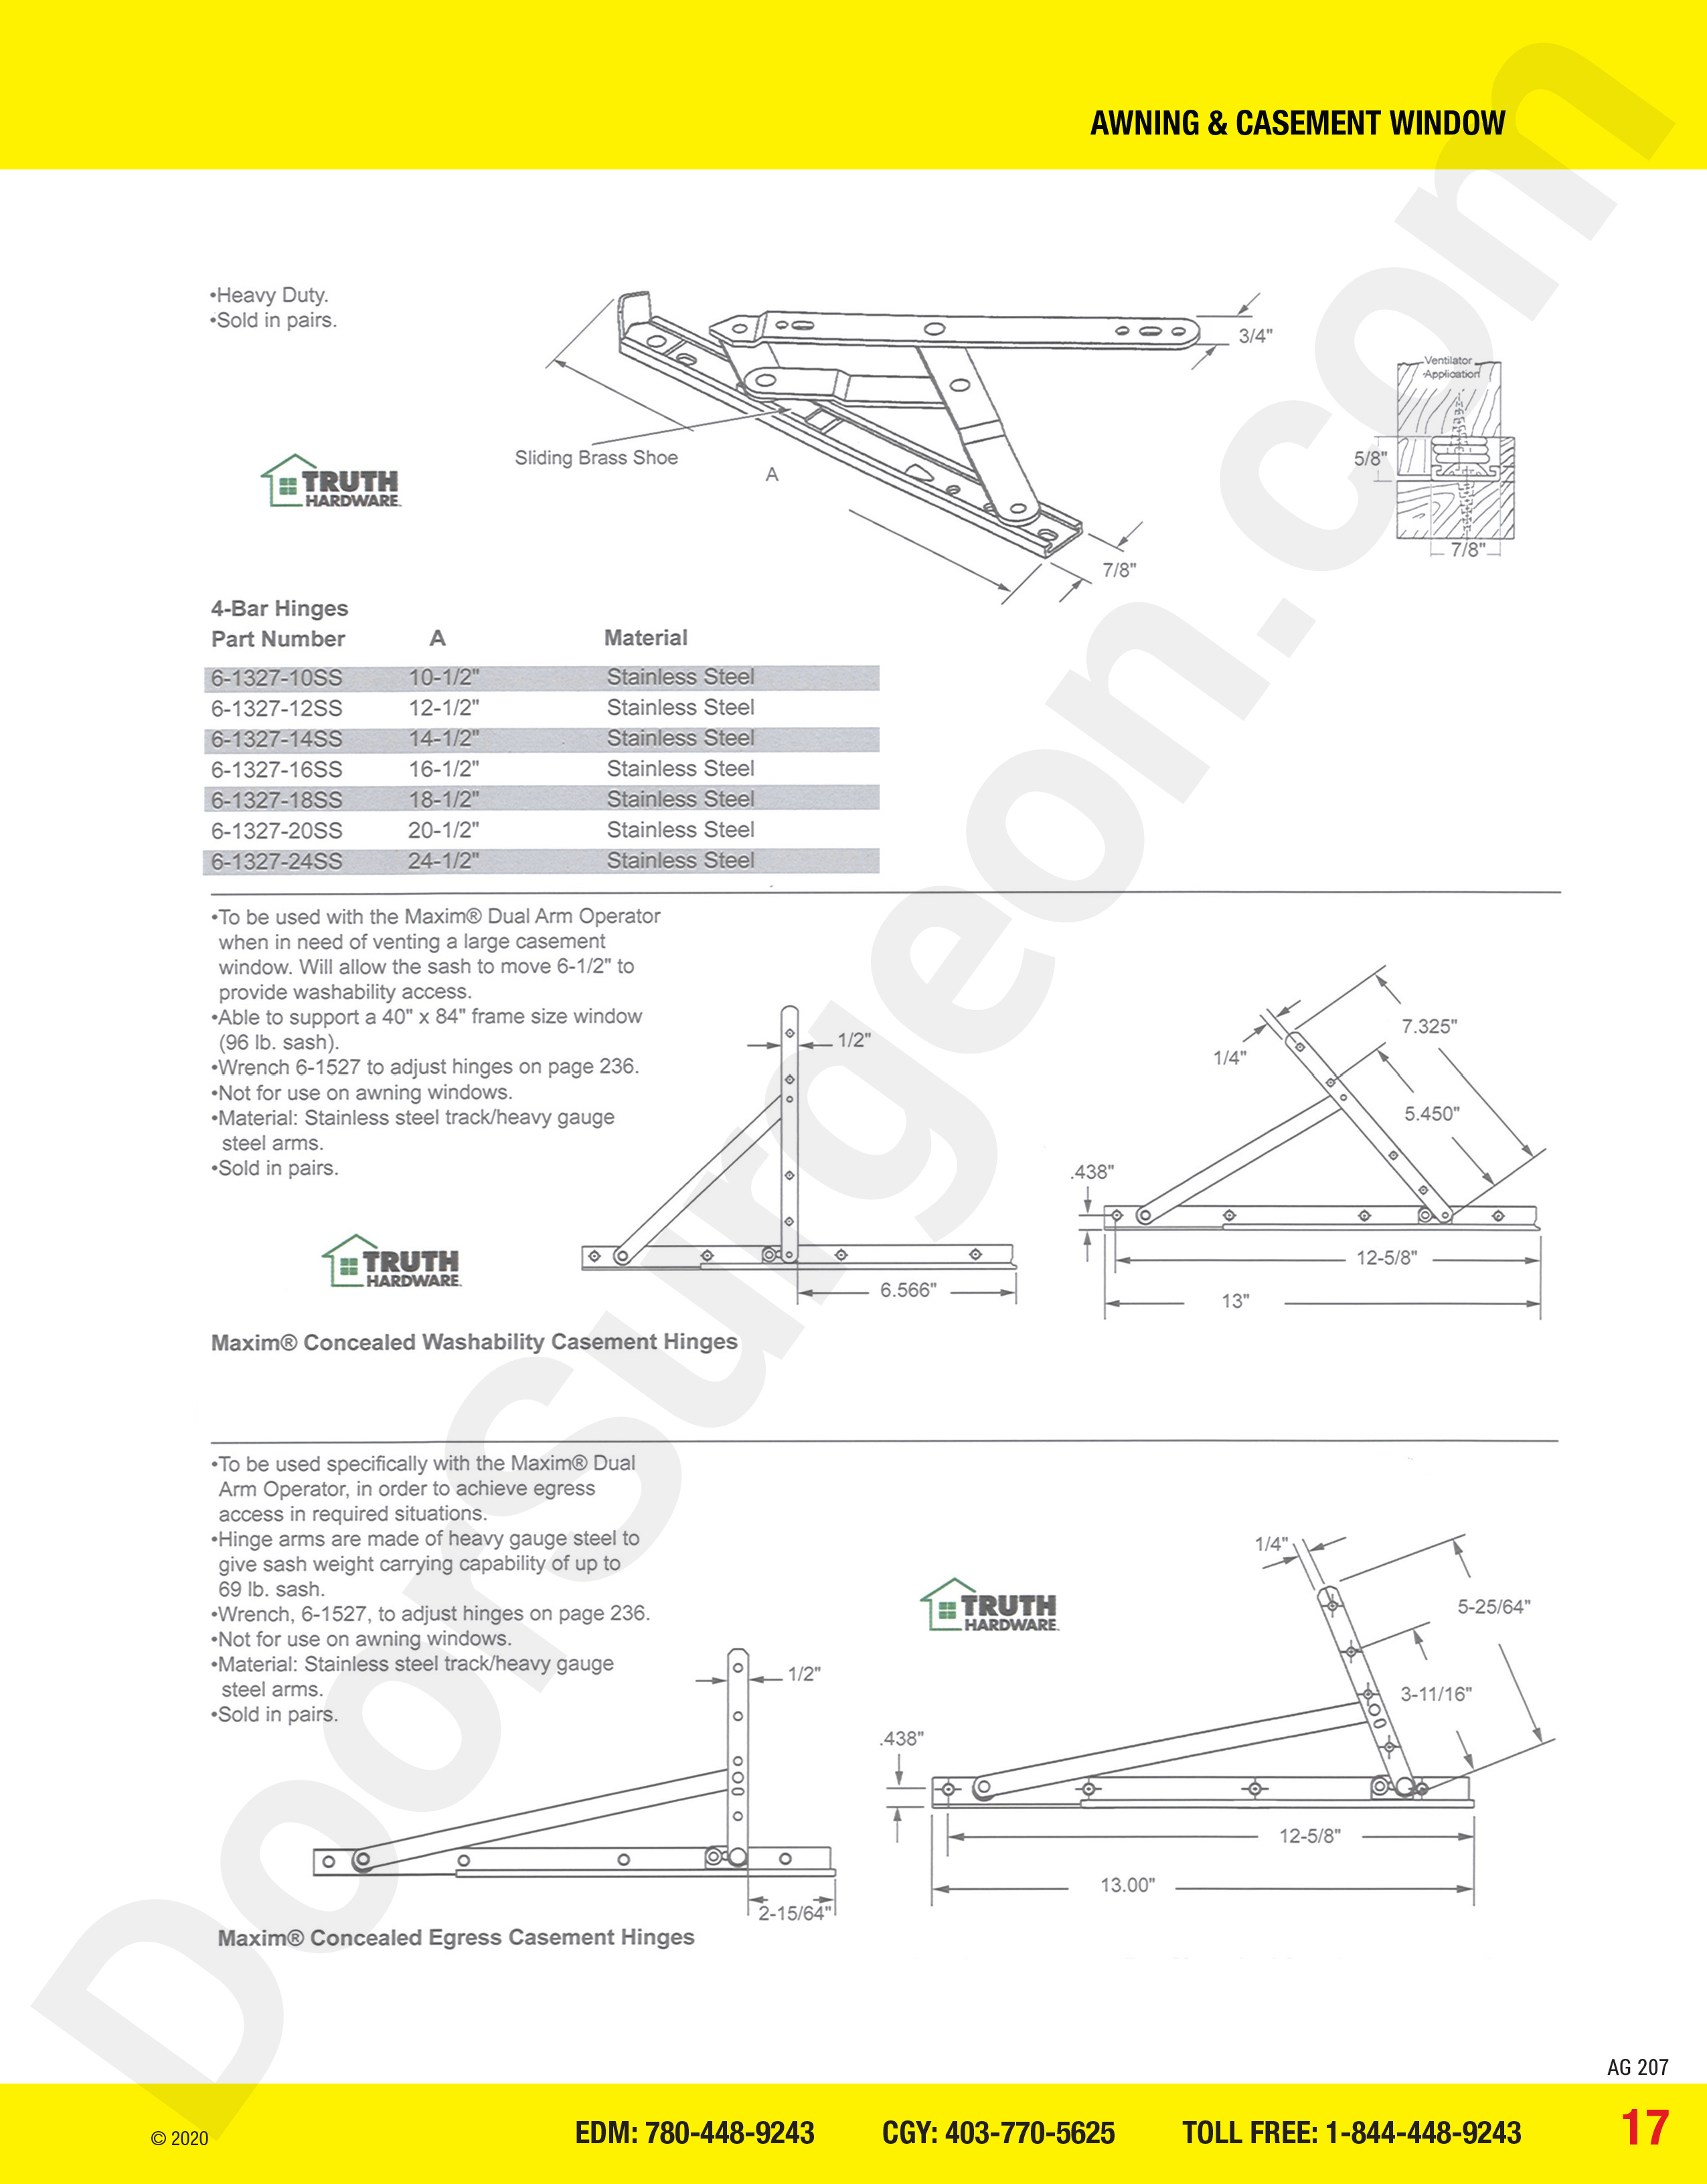 awning and casement window parts for maxim hinges